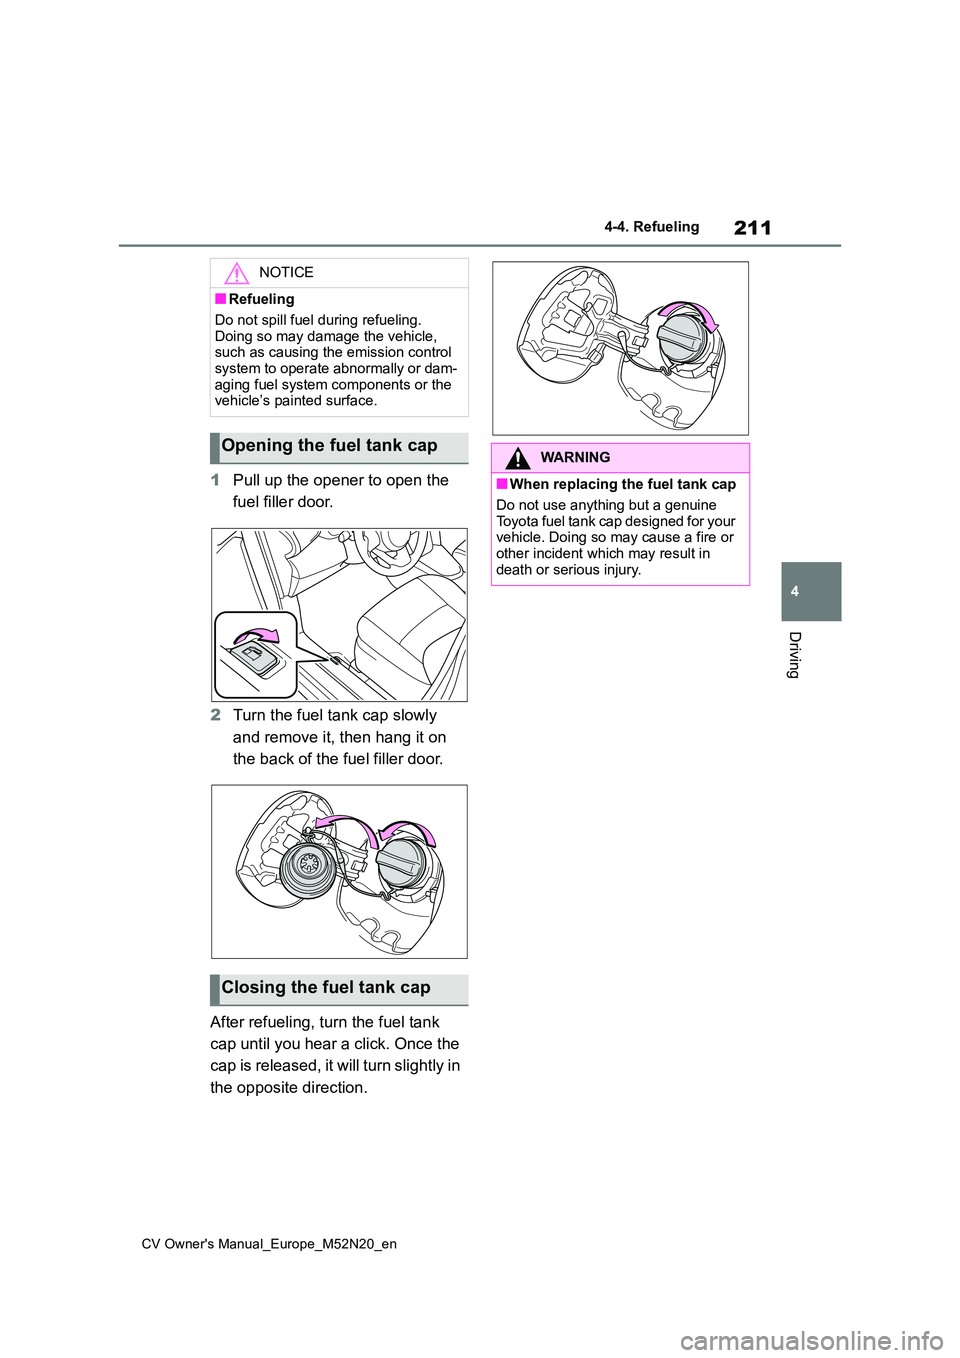 TOYOTA YARIS CROSS 2022  Owners Manual 211
4
CV Owner's Manual_Europe_M52N20_en
4-4. Refueling
Driving
1Pull up the opener to open the  
fuel filler door. 
2 Turn the fuel tank cap slowly  
and remove it, then hang it on  
the back of 